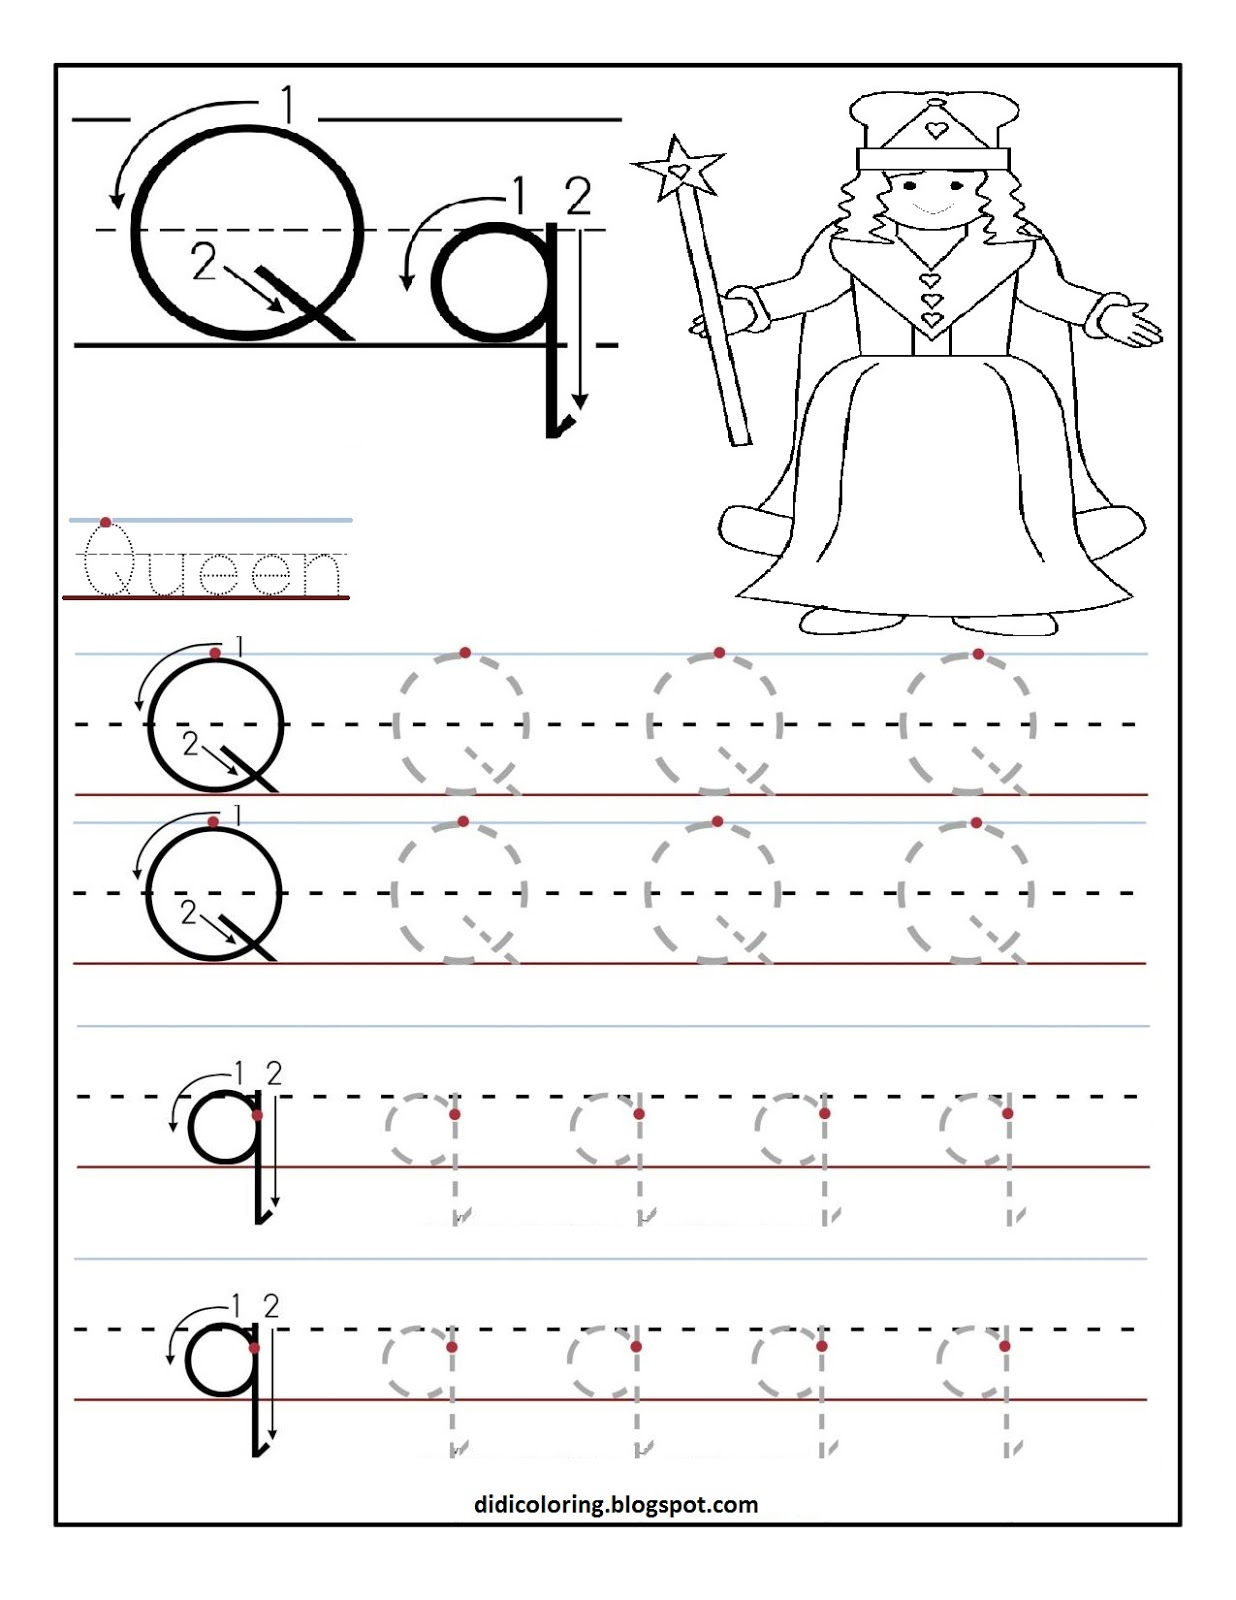 Free printable worksheet letter Q for your child to learn and write